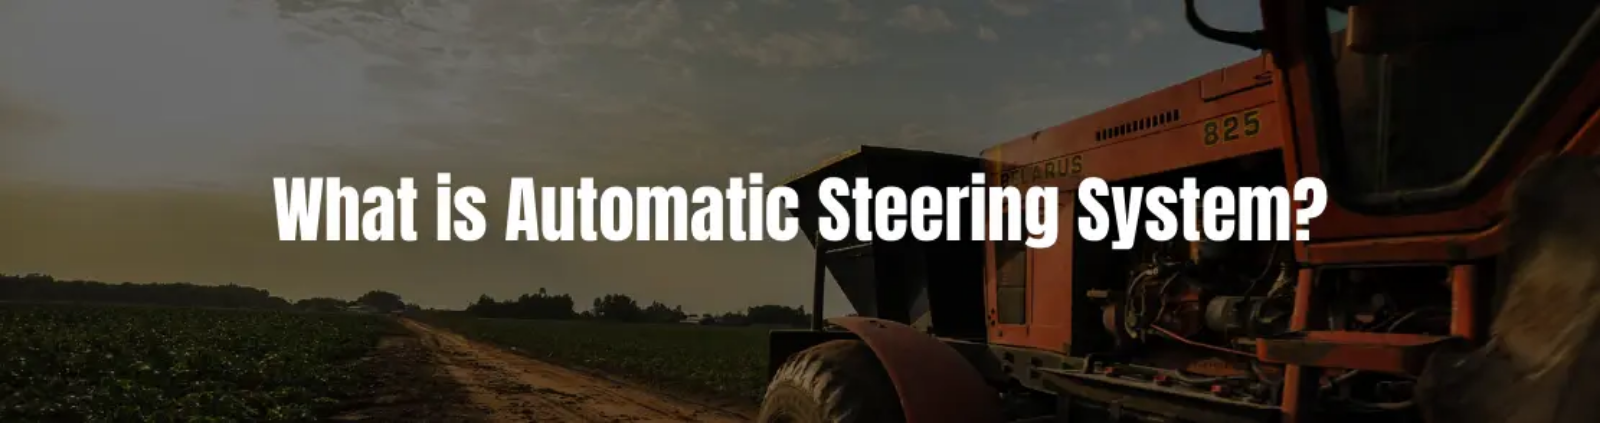 What is automatic steering system?